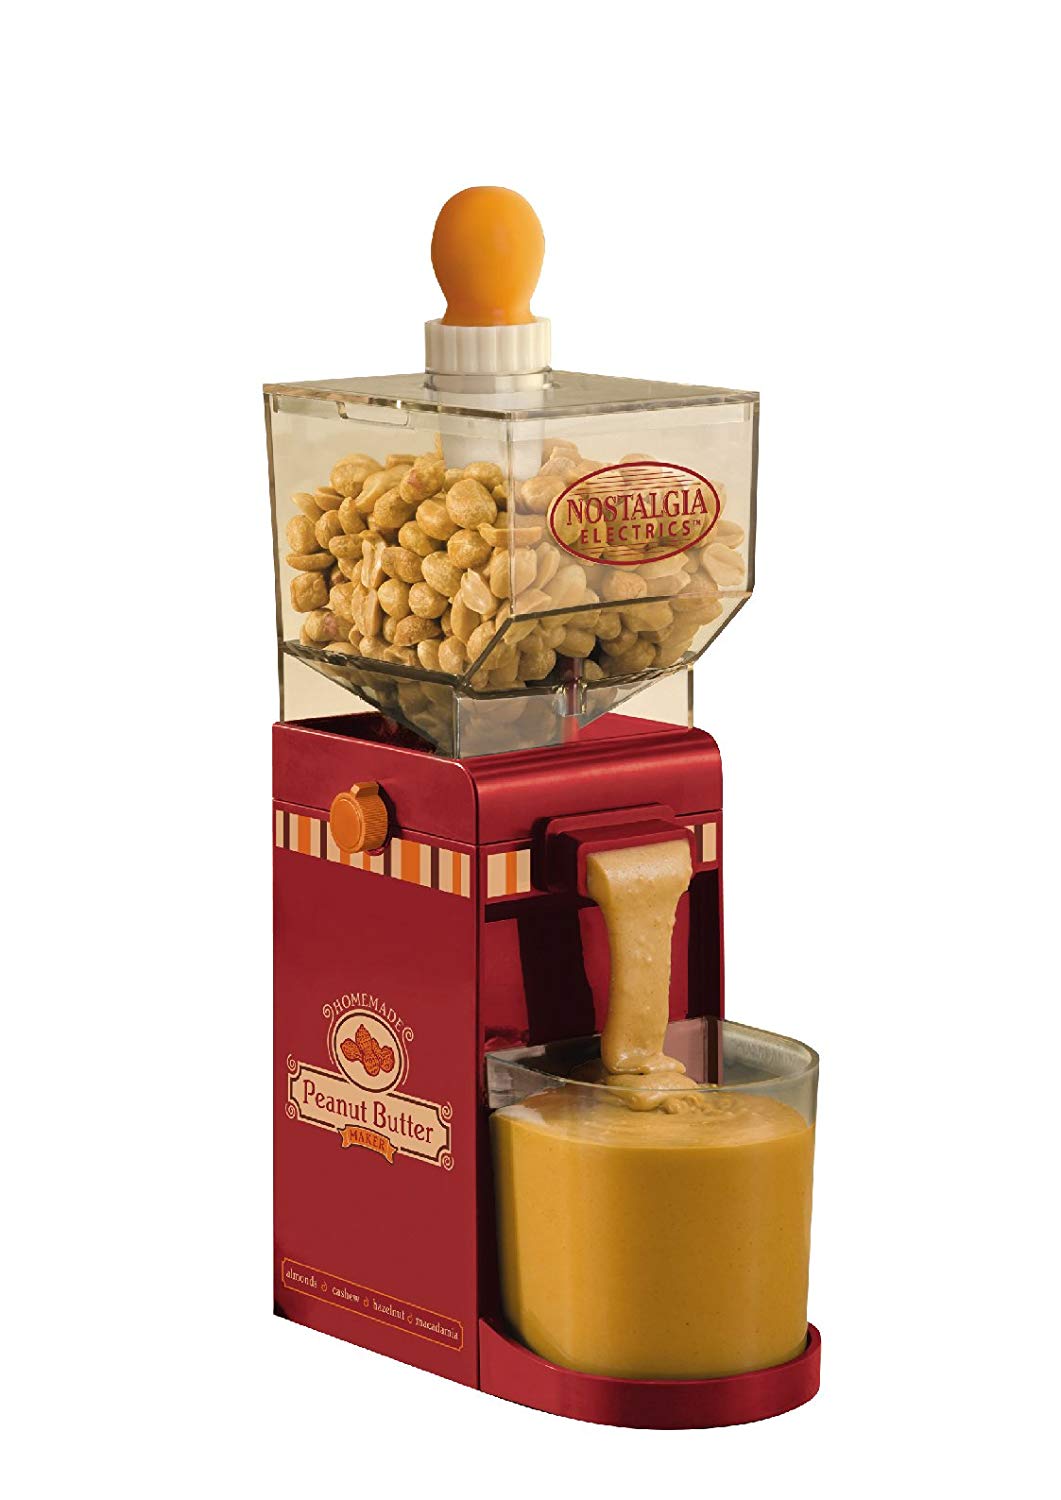 you can now buy a peanut butter maker machine on amazon for your home